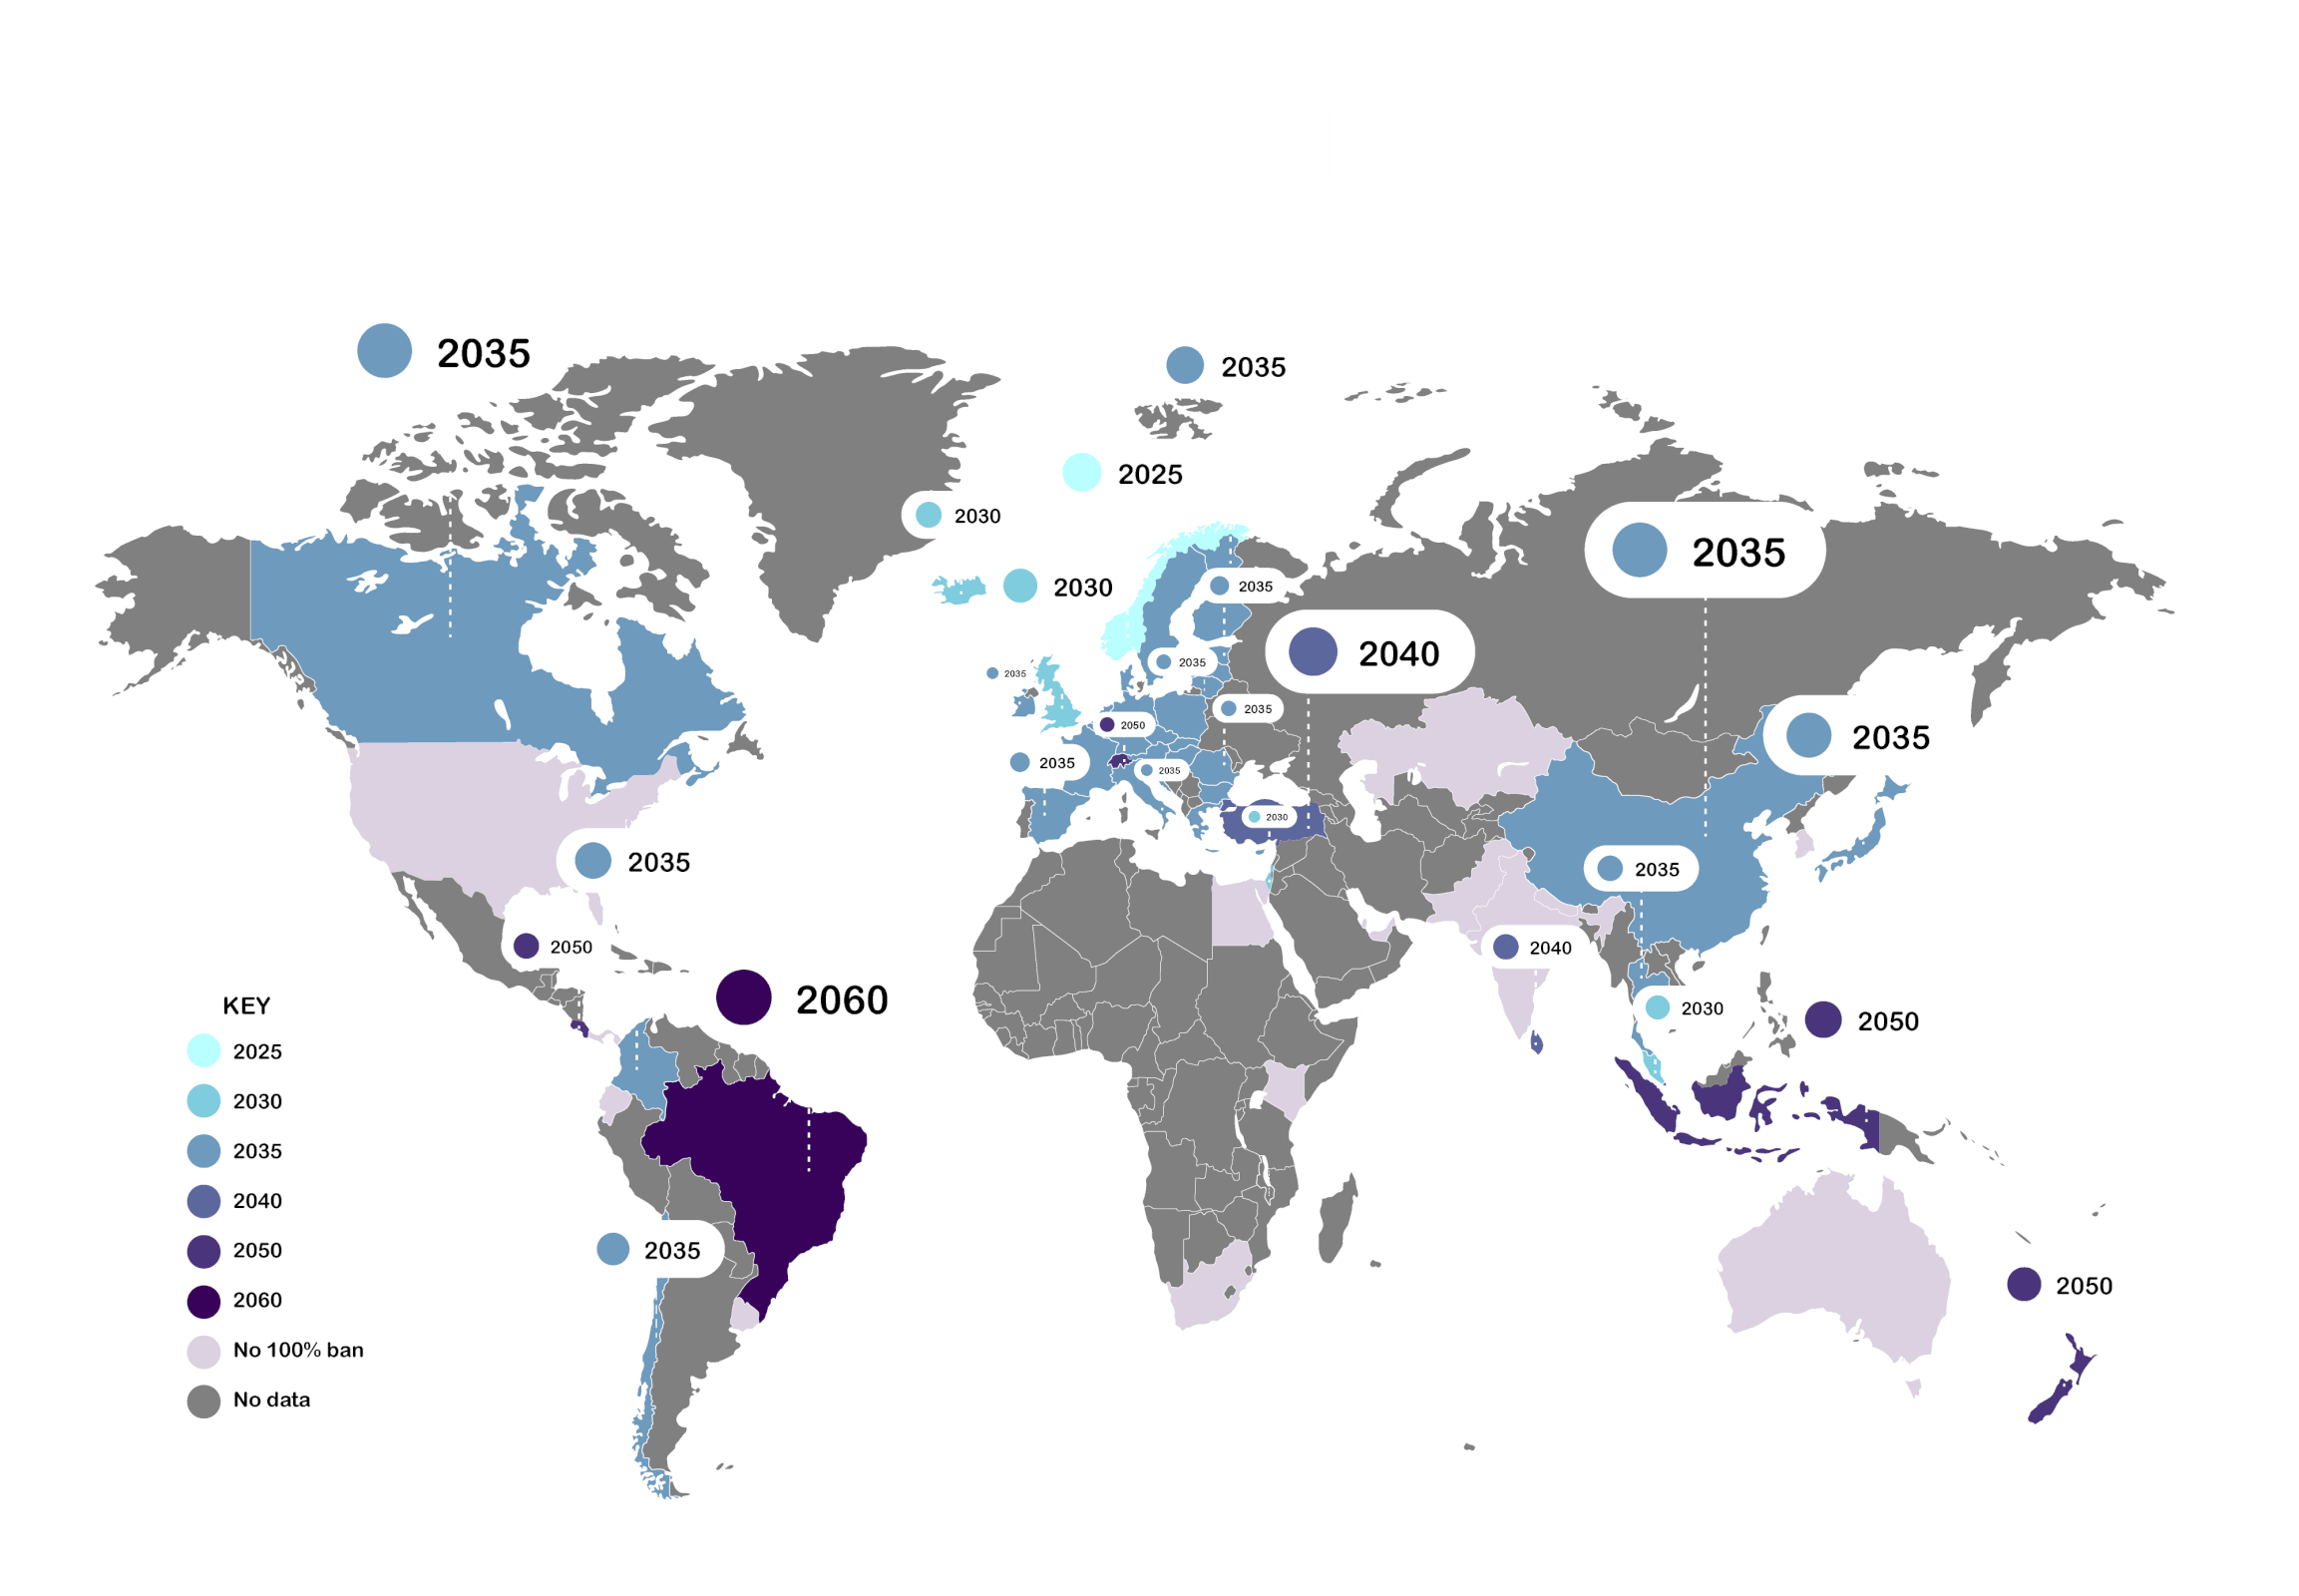 A map of the world showing which countries are banning fossil fuel car sales at different dates